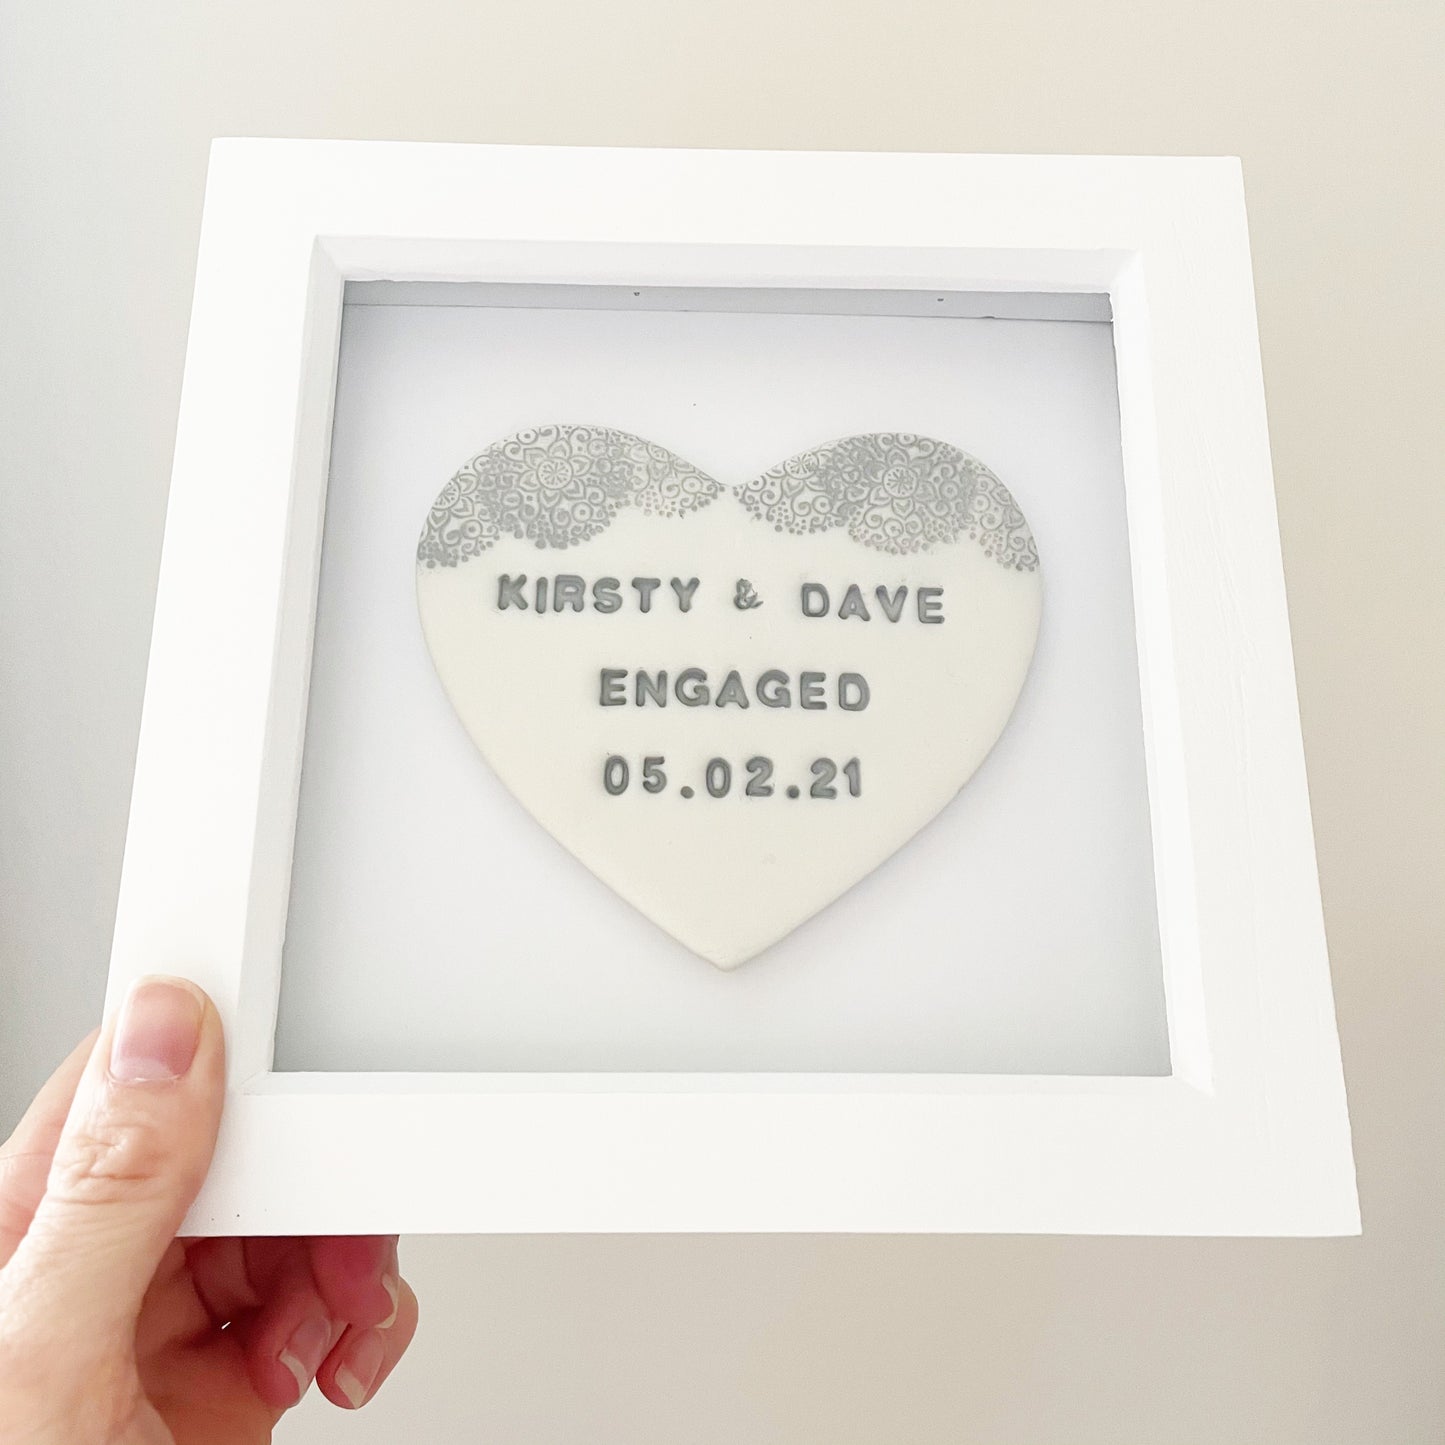 Personalised framed engagement gift, pearlised white clay heart with a white lace edge at the top of the heart in a white box frame, the heart is personalised with KIRSTY & DAVE ENGAGED 05.02.21